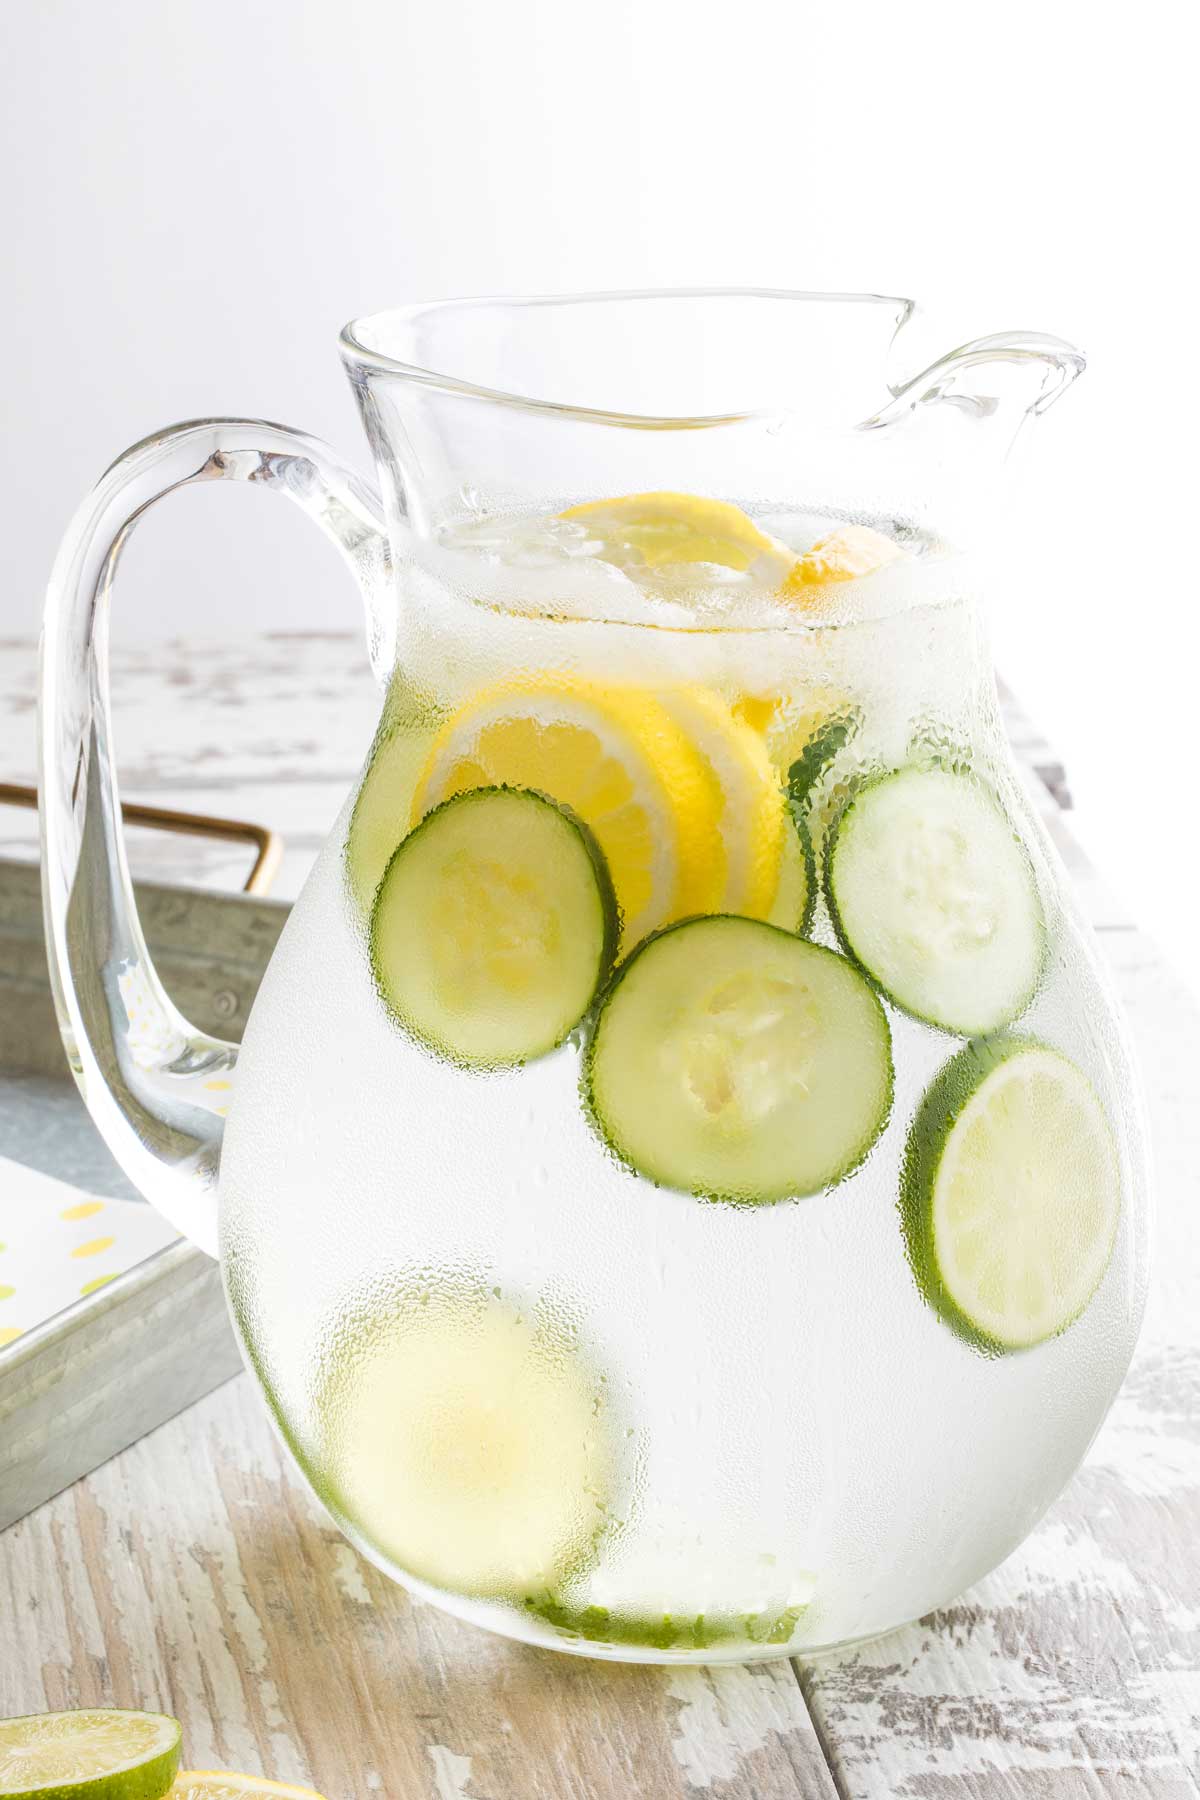 Condensation-covered pitcher of water on distressed white wood, with slice of lemons, limes and cucumber and small ice cubes floating in it.